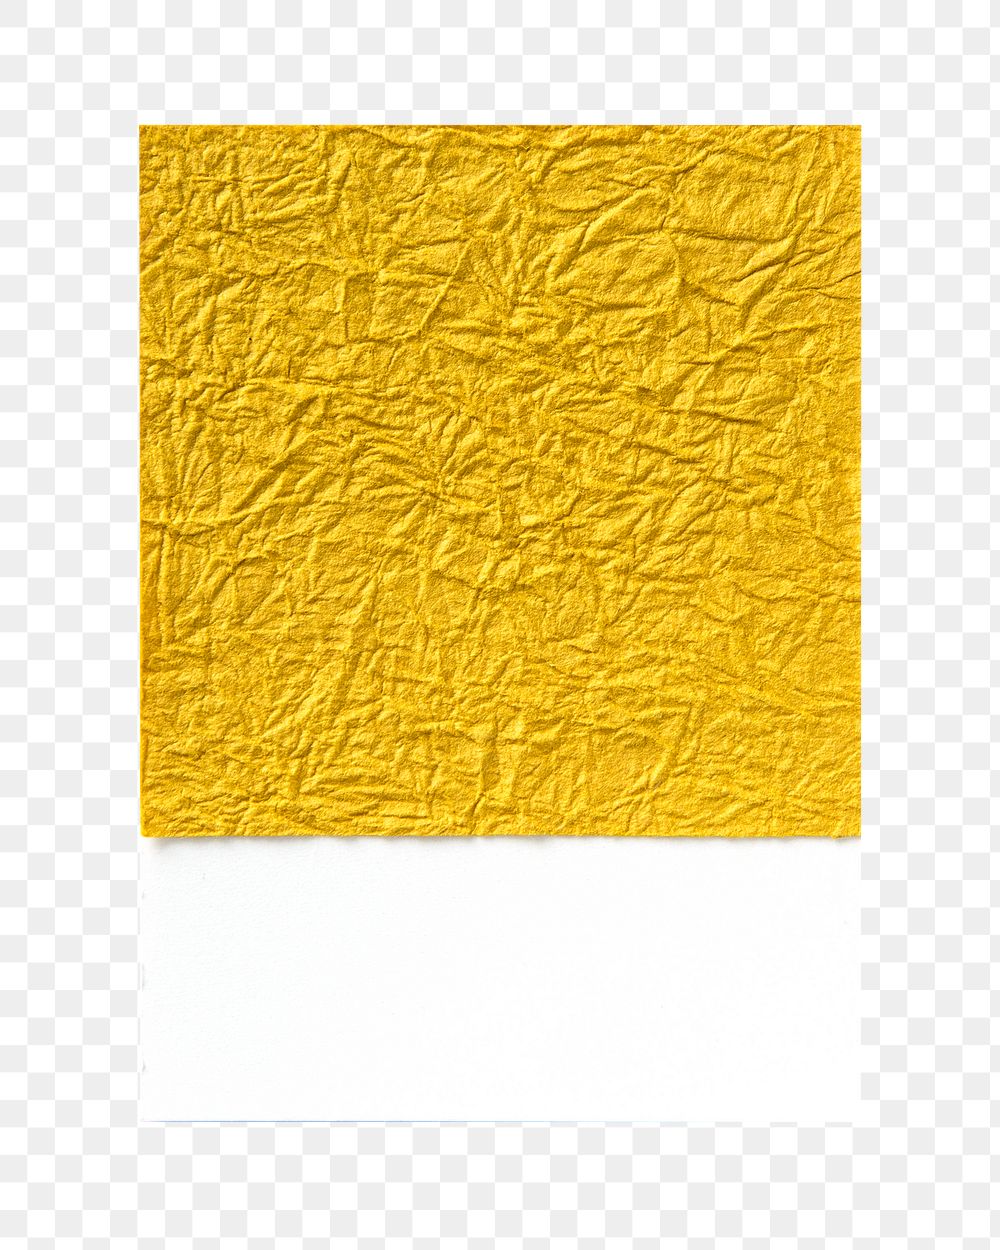 Yellow wrinkled paper png, transparent background